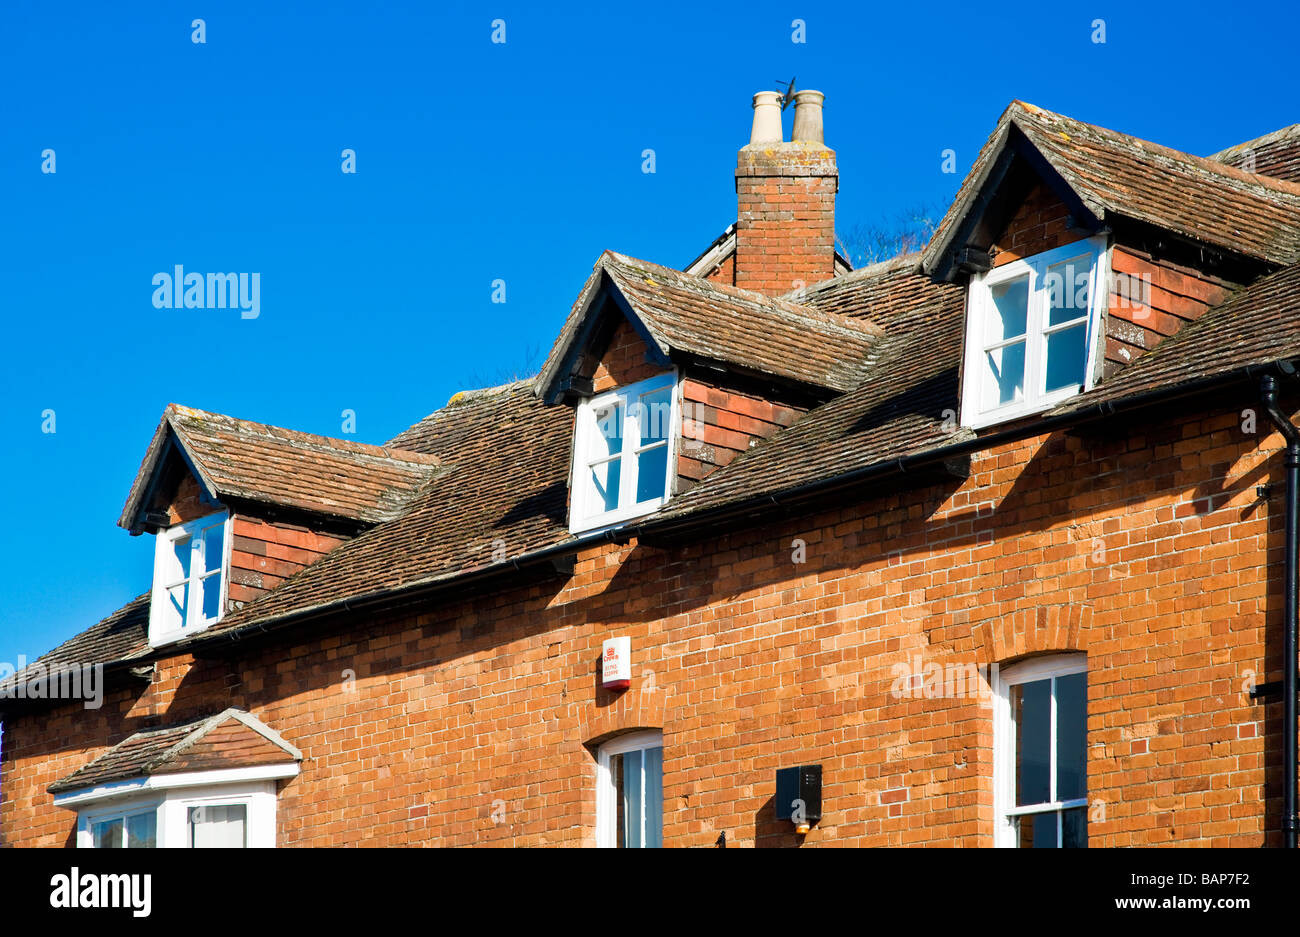 A row of three gable fronted dormer windows in a tiled roof in Wiltshire England UK Stock Photo